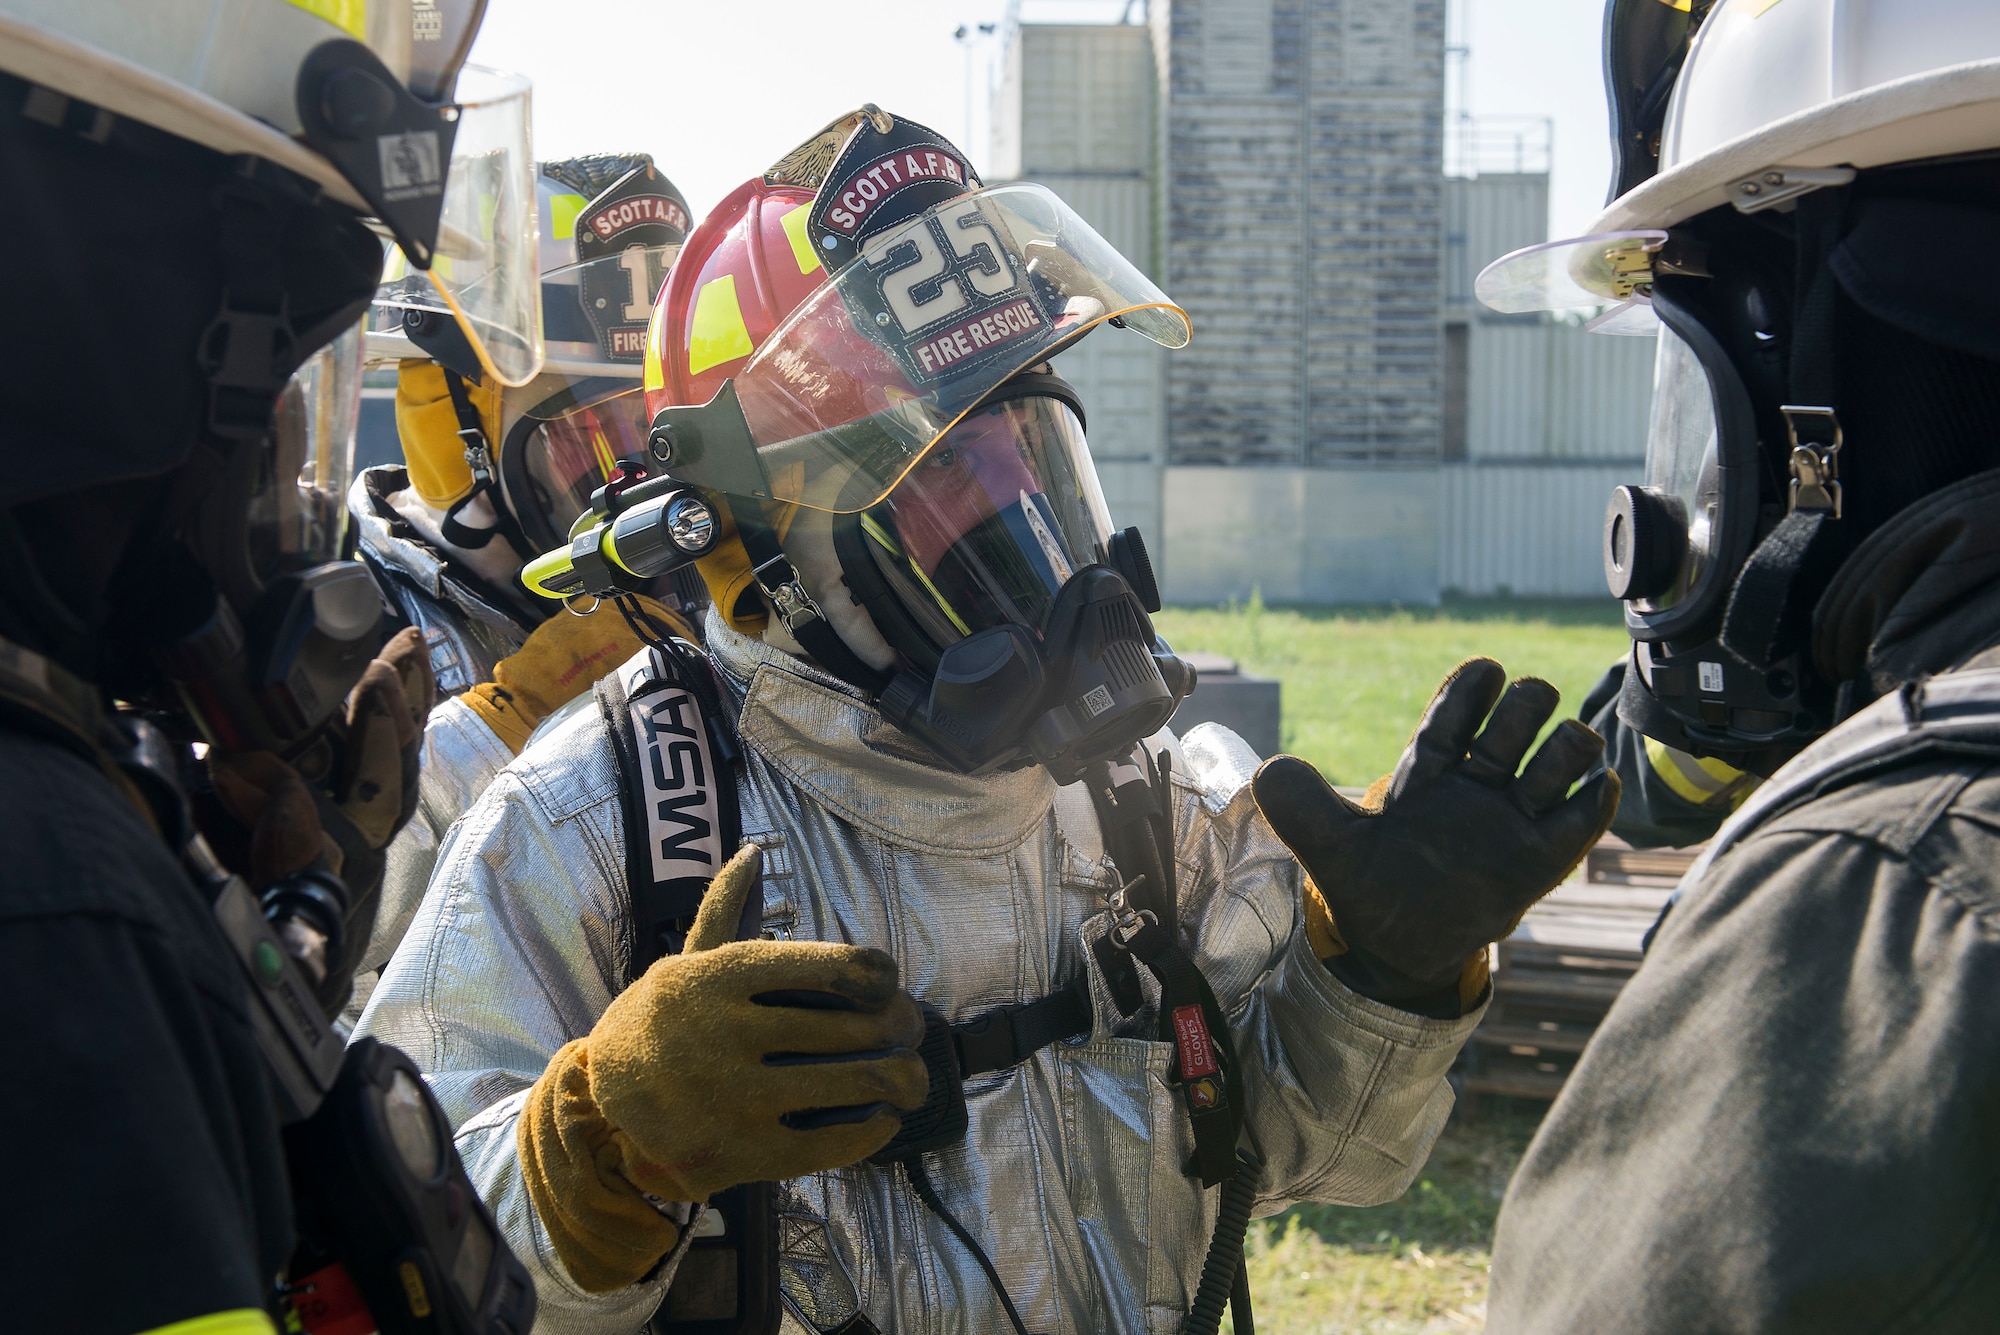 Firefighters discuss tactics and procedures during a training course at Scott Air Force Base, Ill., Aug. 31, 2016. The training featured firefighters from multiple bases and from the local community to include the 628th CES from Joint Base Charleston, South Carolina, the 19th CES from Little Rock AFB, Arkansas, the Mehlville Fire Protection District from St. Louis, Missouri, and the St. Louis Public Schools. (U.S. Air Force photo/Tech. Sgt. Jonathan Fowler)